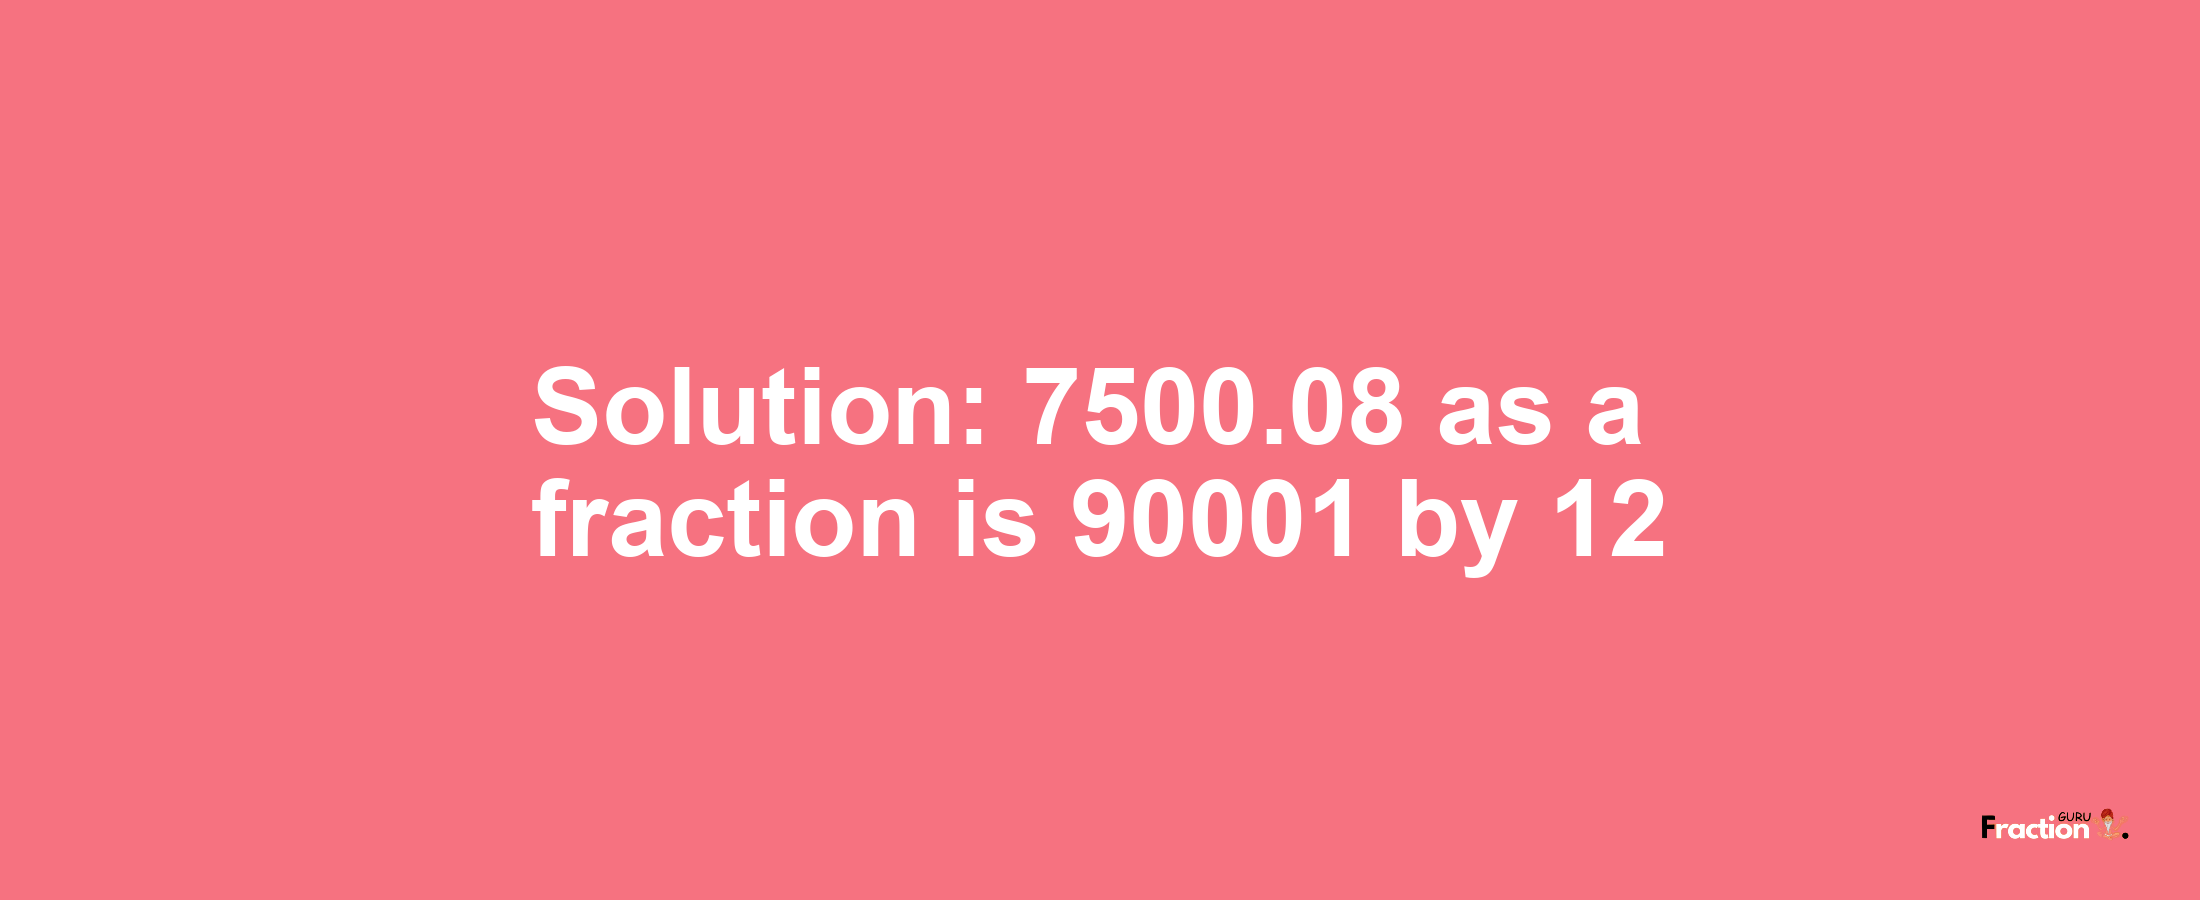 Solution:7500.08 as a fraction is 90001/12